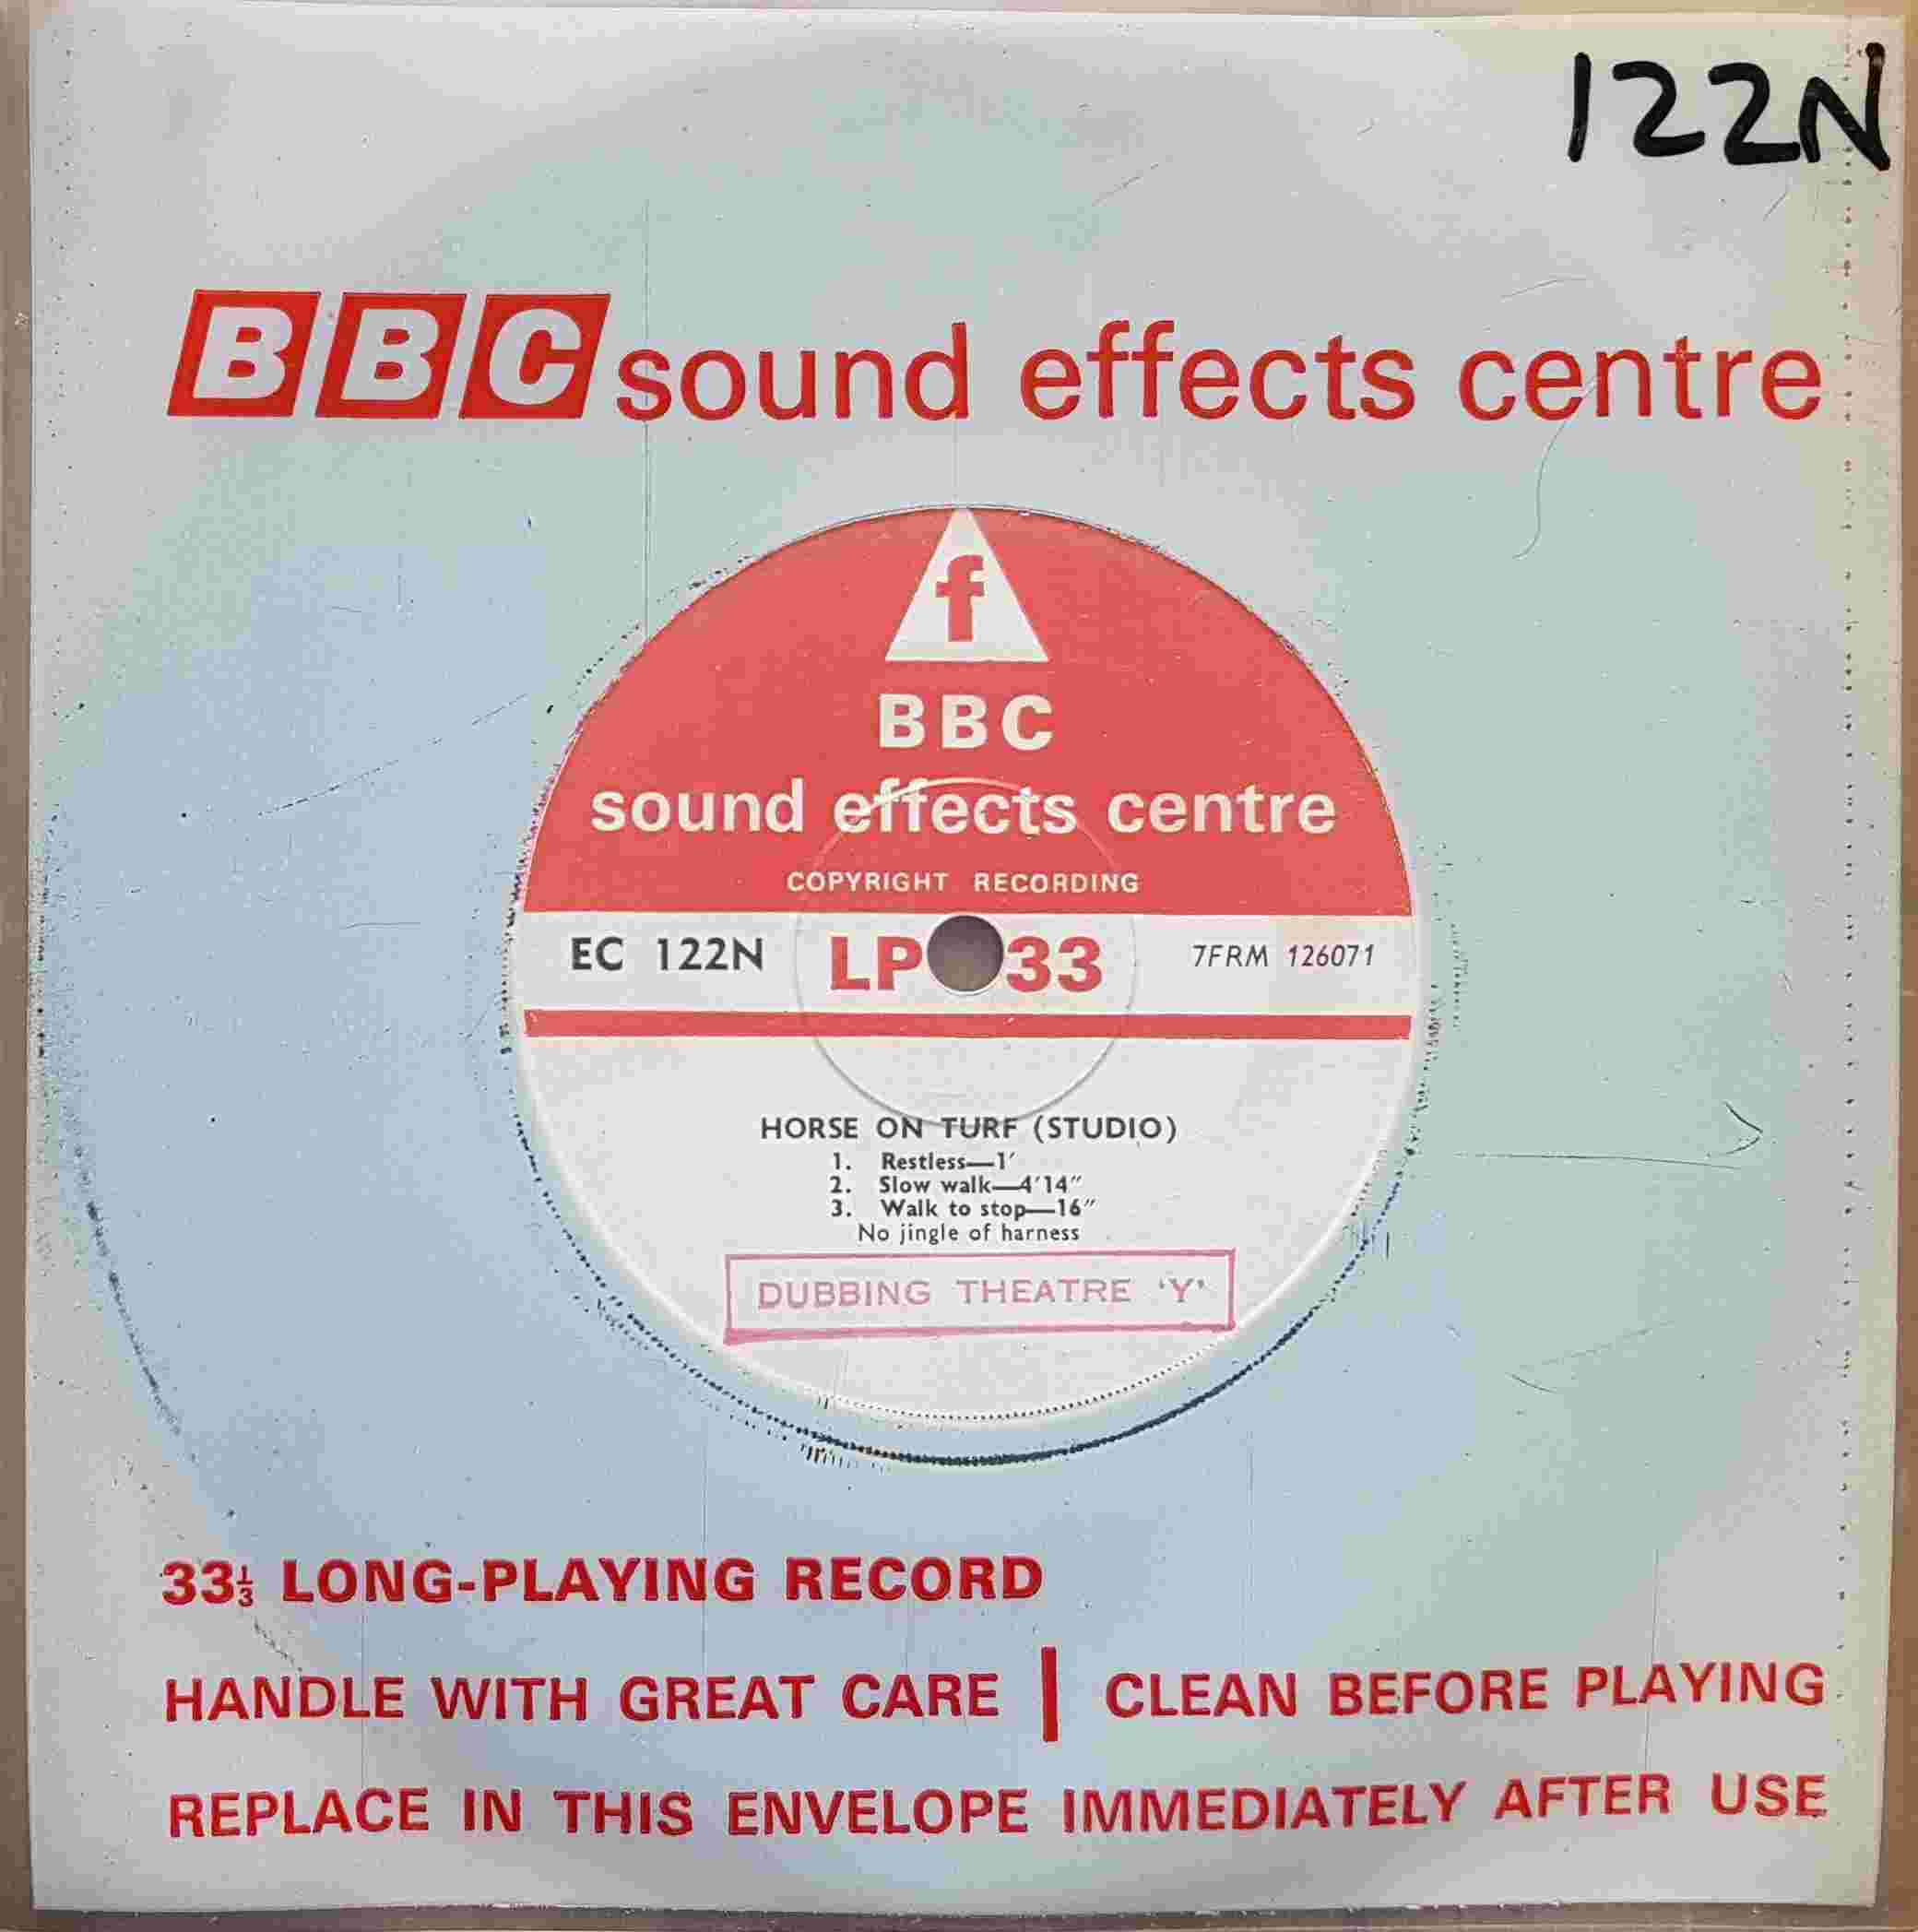 Picture of EC 122N Horse on turf (Studio) - No jingle or harness by artist Not registered from the BBC singles - Records and Tapes library